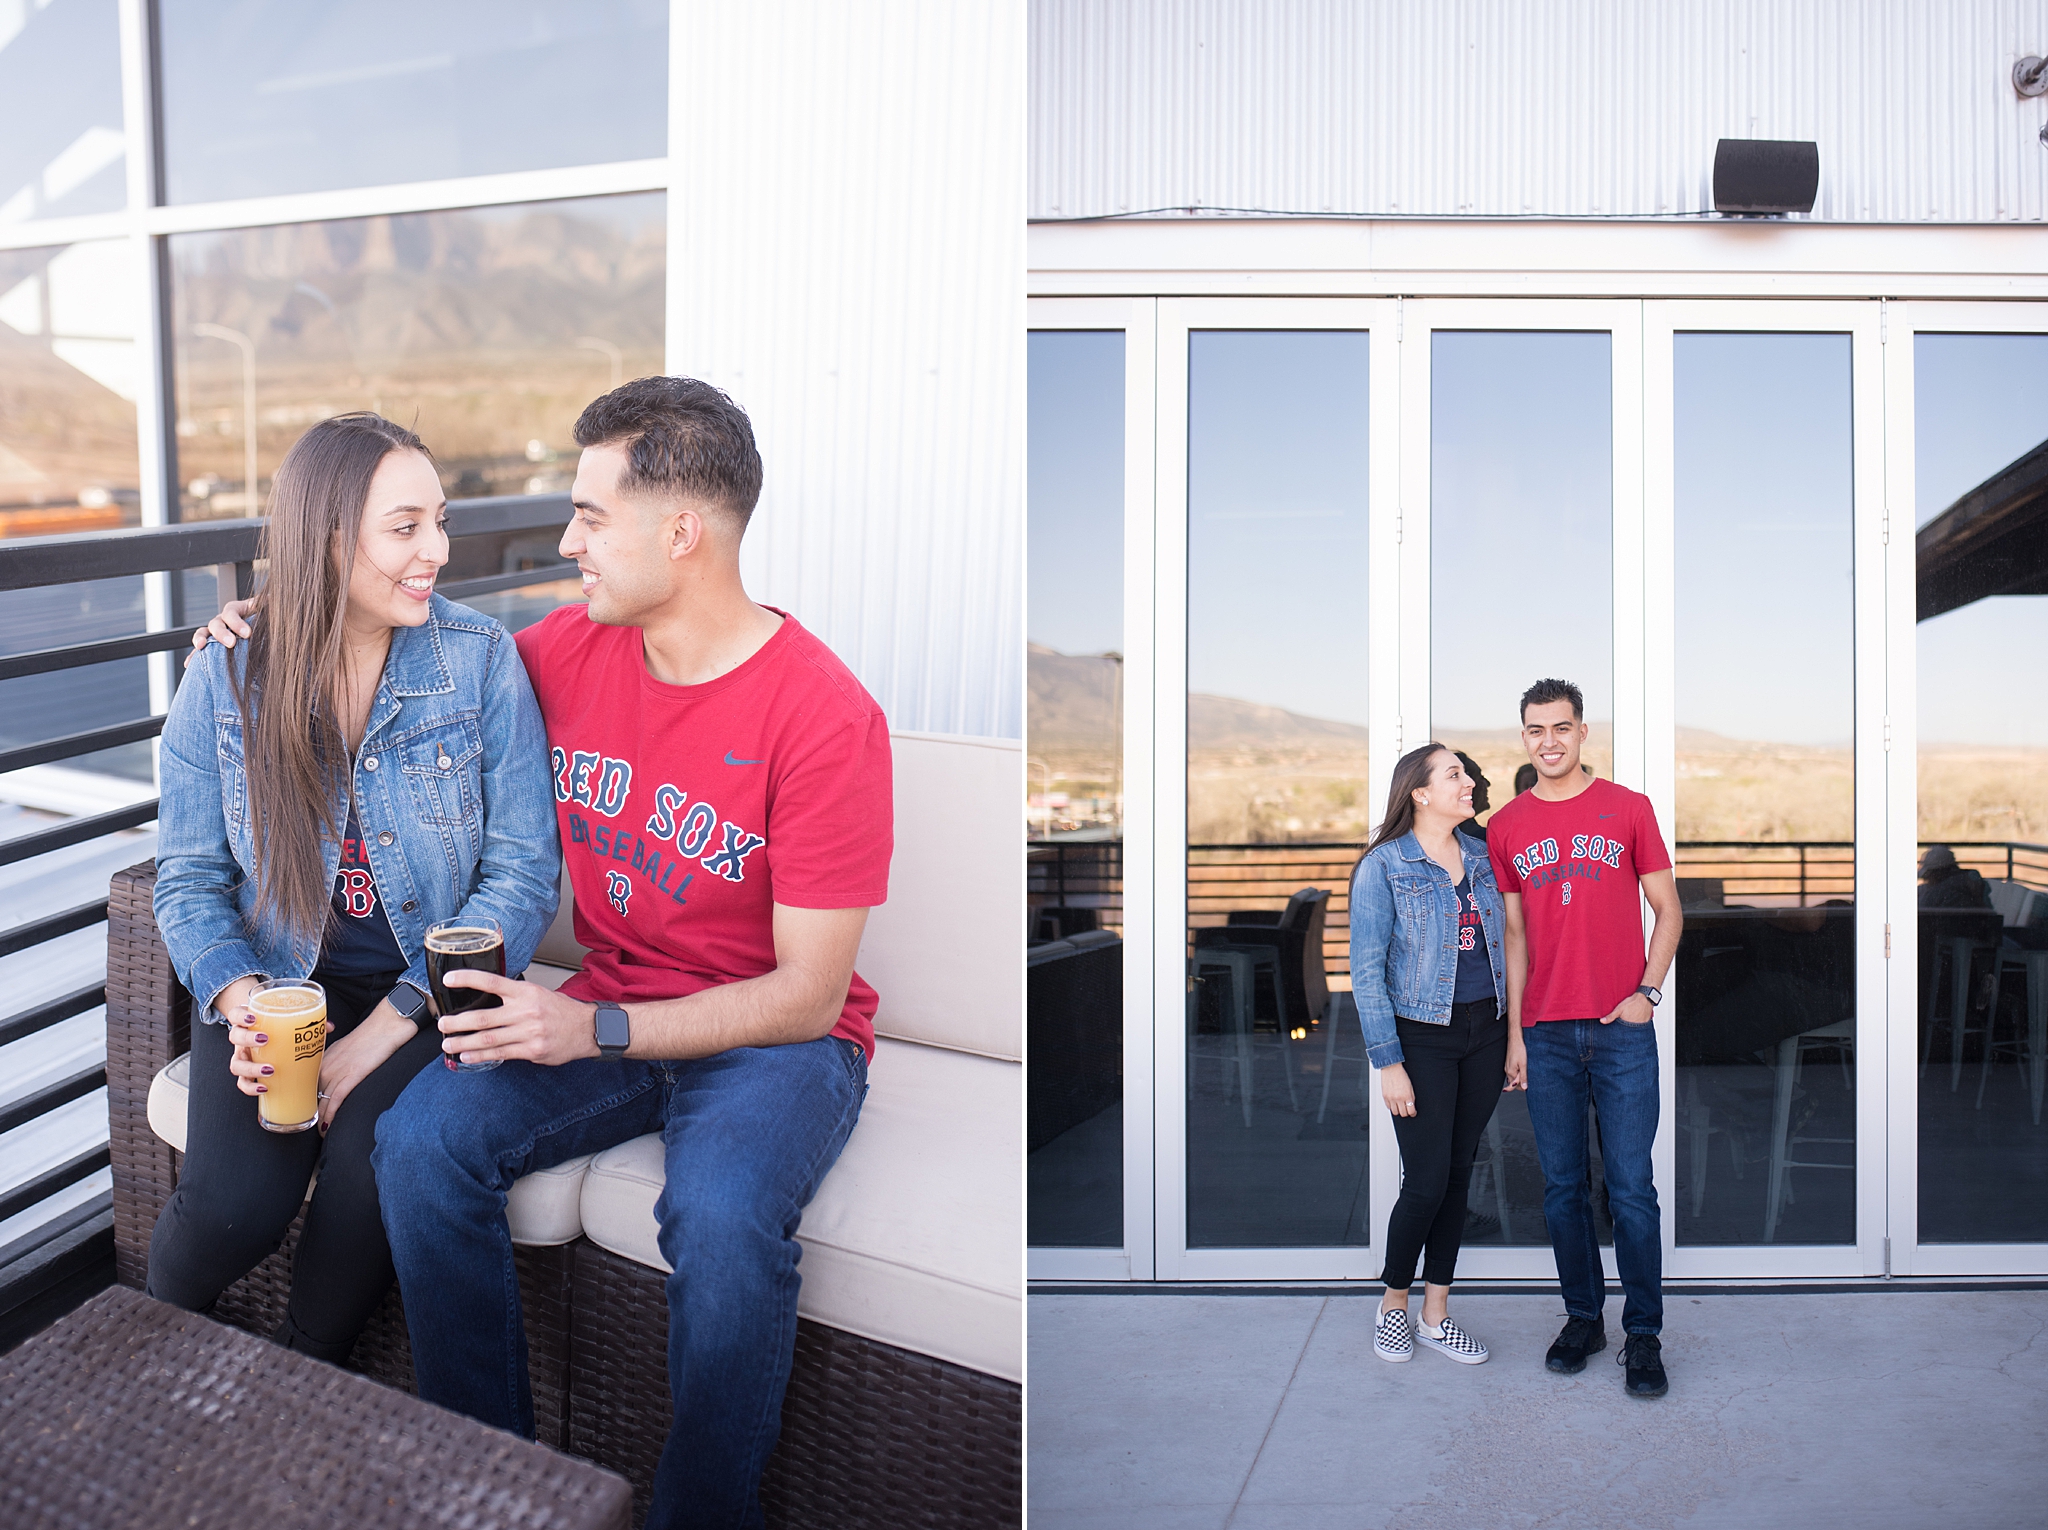 bosque brewery engagement session placitas mountains foothills albuquerque wedding photography new mexico wedding photographer kayla kitts photography_0012.jpg